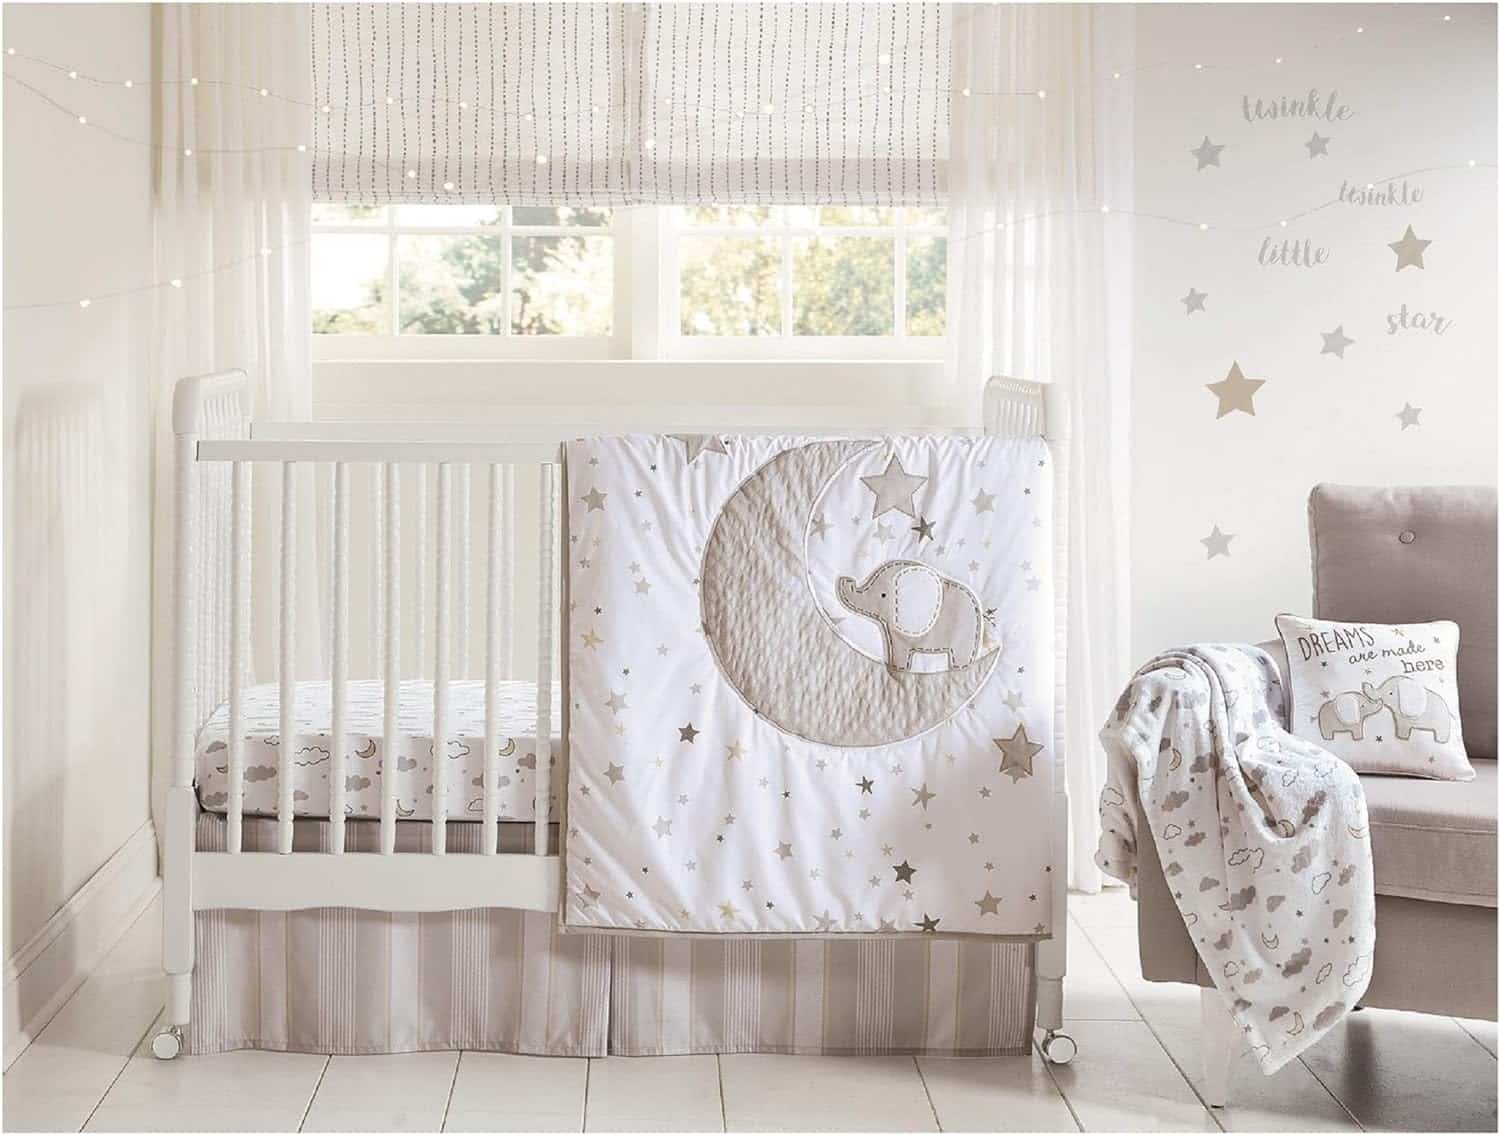 Wendy Bellissimo 4pc Nursery Bedding Baby Crib Bedding Set (Elephant) – A Stylish and Durable Choice for Your Baby’s Nursery